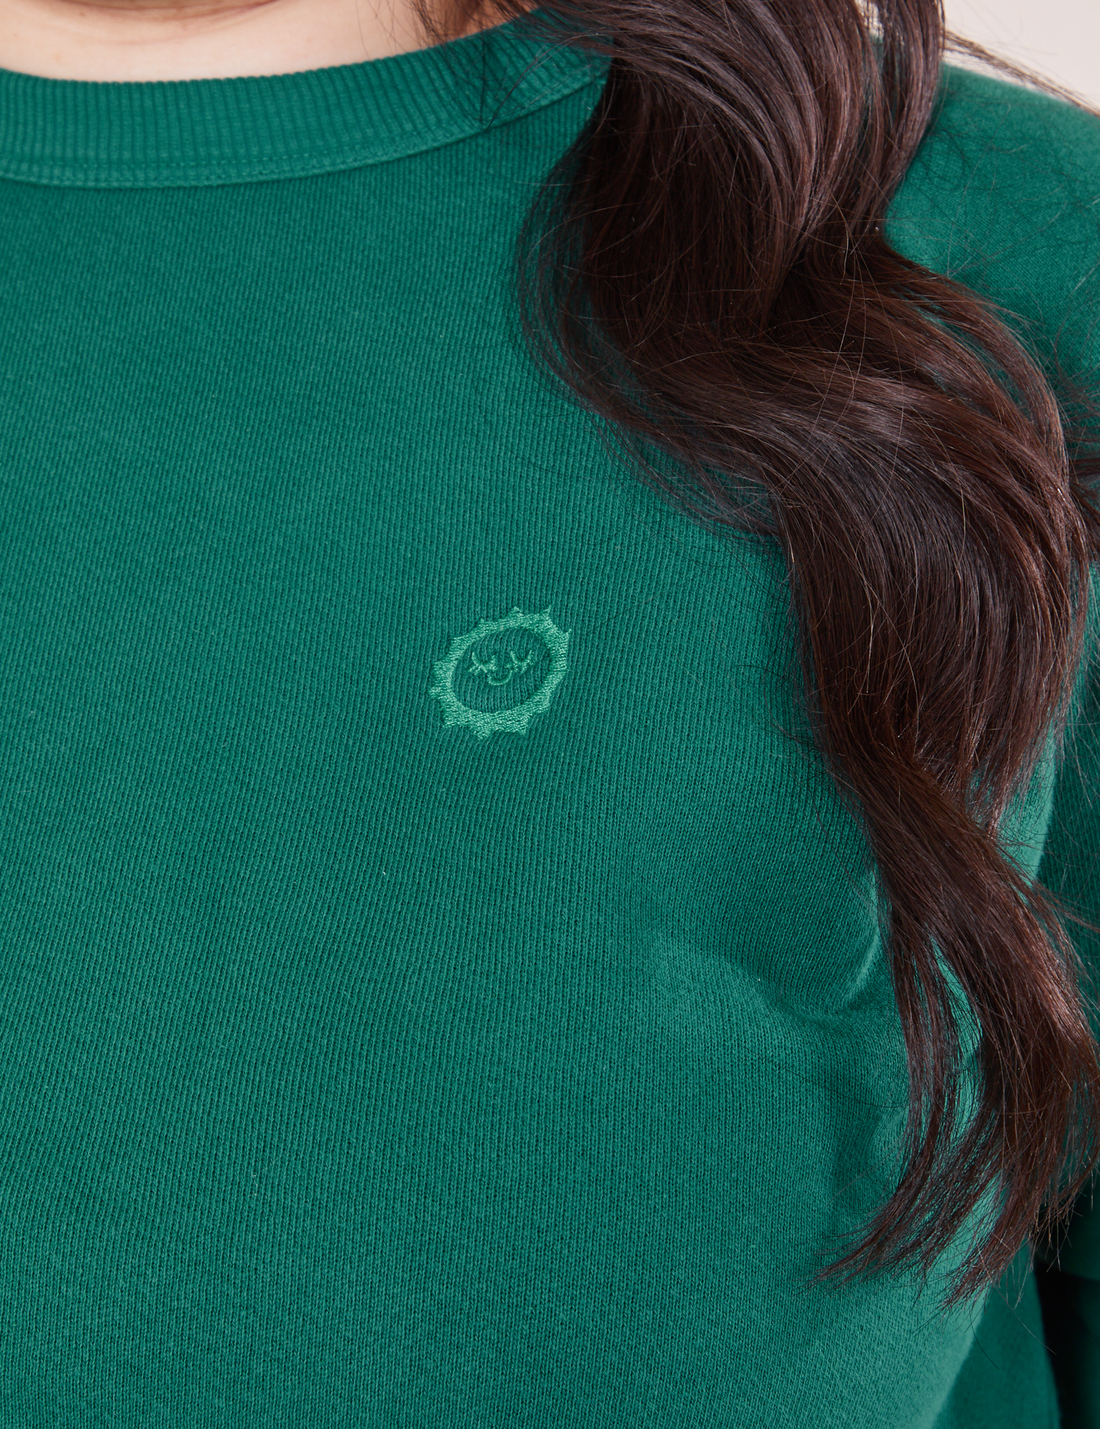 Heavyweight Crew in Hunter Green front close up on Ashley. Embroidered sun baby logo.